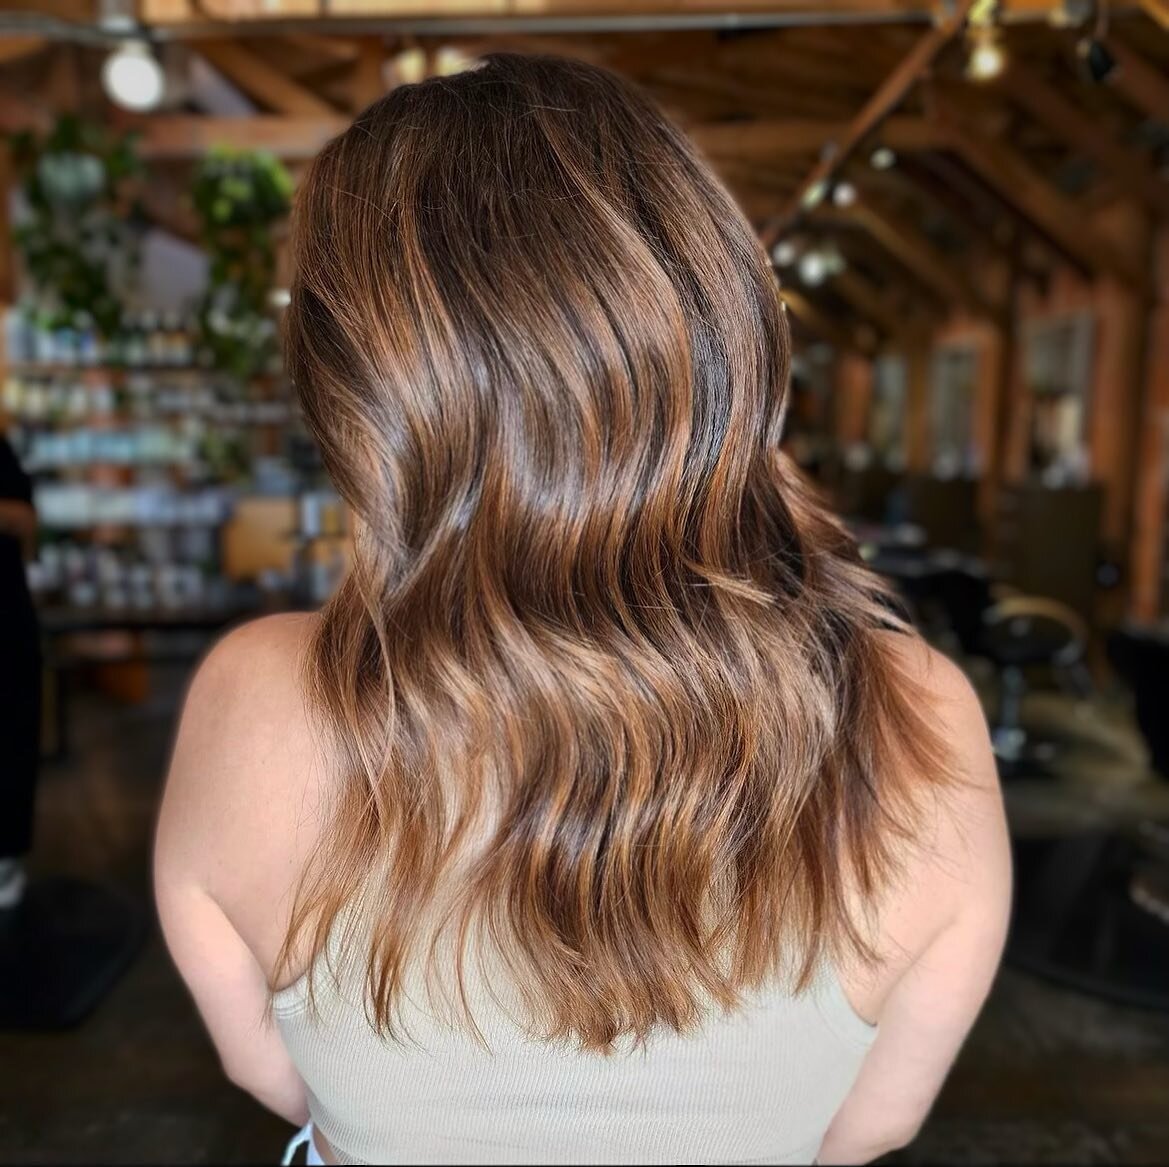 Color me Caramel 

Balayaged by @tatuxhair using @davinescolor liberty and toned with view 40g 8,23 + 20g 7,32 + 10g 7,35

Thinking about summer? 

Book now to start the process of lightening your hair. It doesn't happen in one session! 

Call to boo